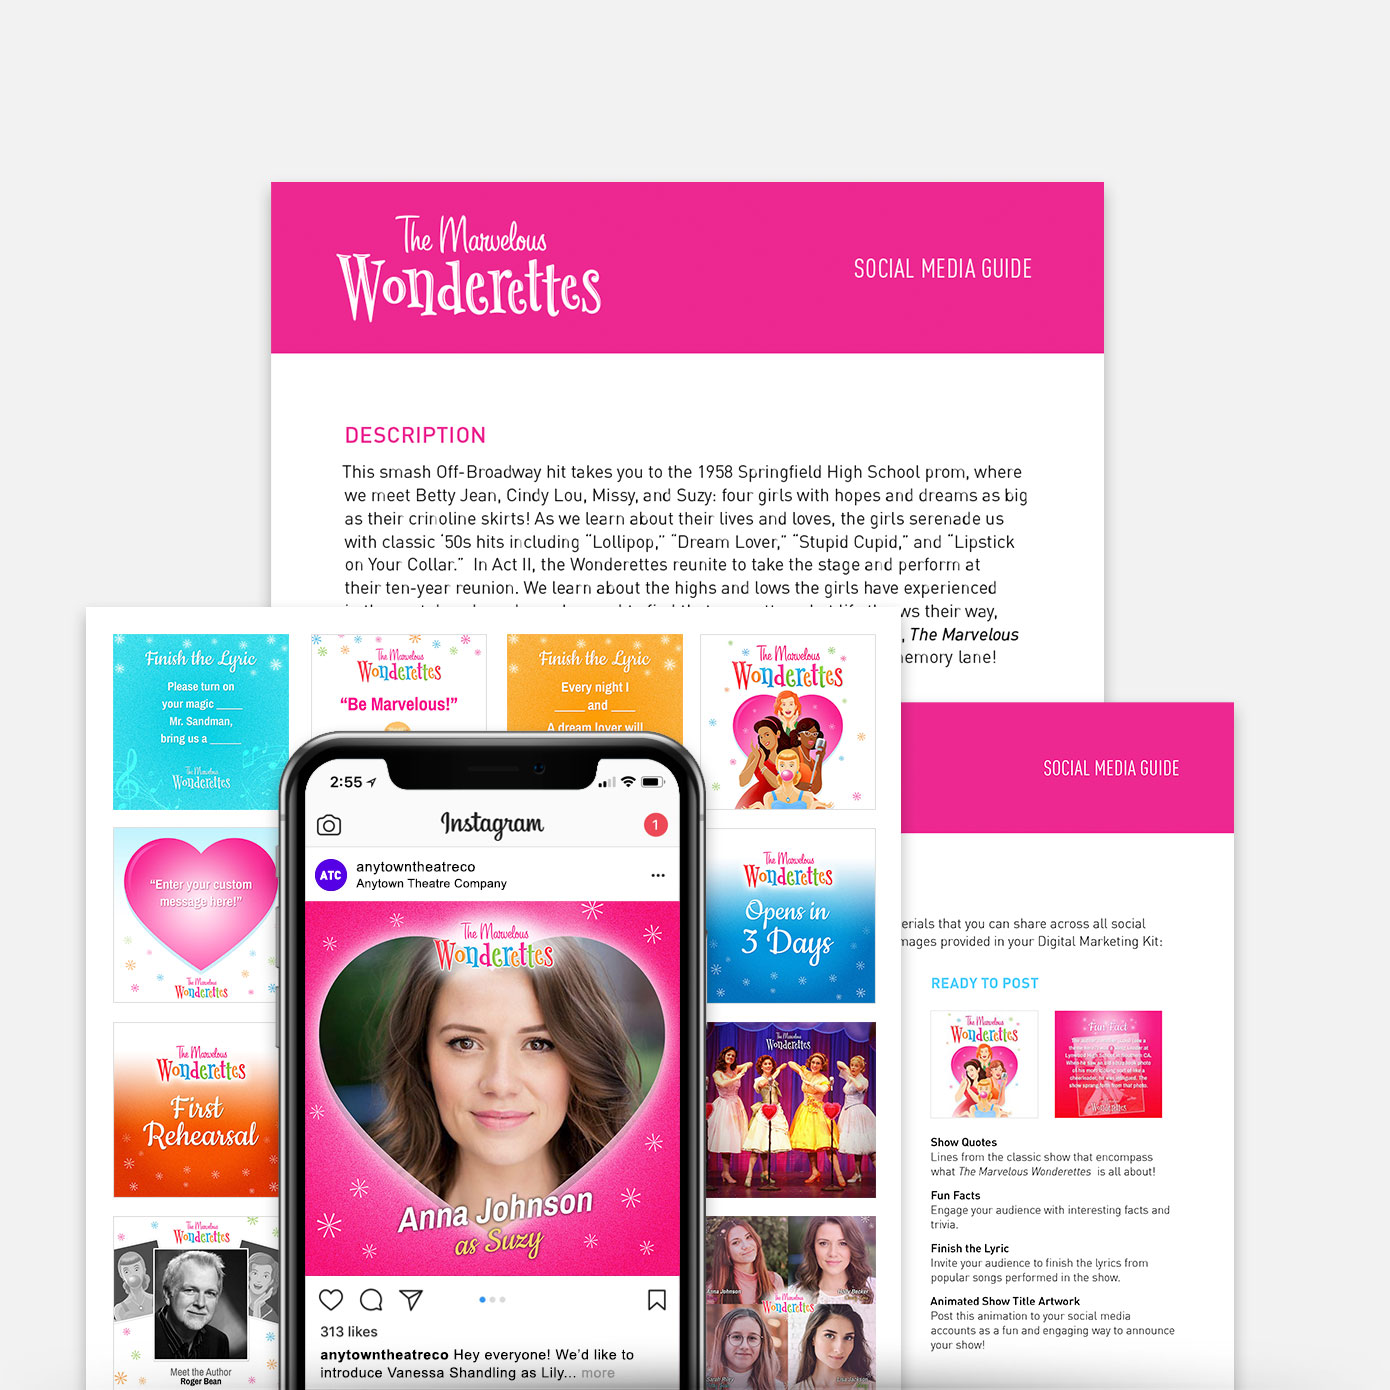 The Marvelous Wonderettes ’58 (One-Act) Promotion Kit & Social Media Guide